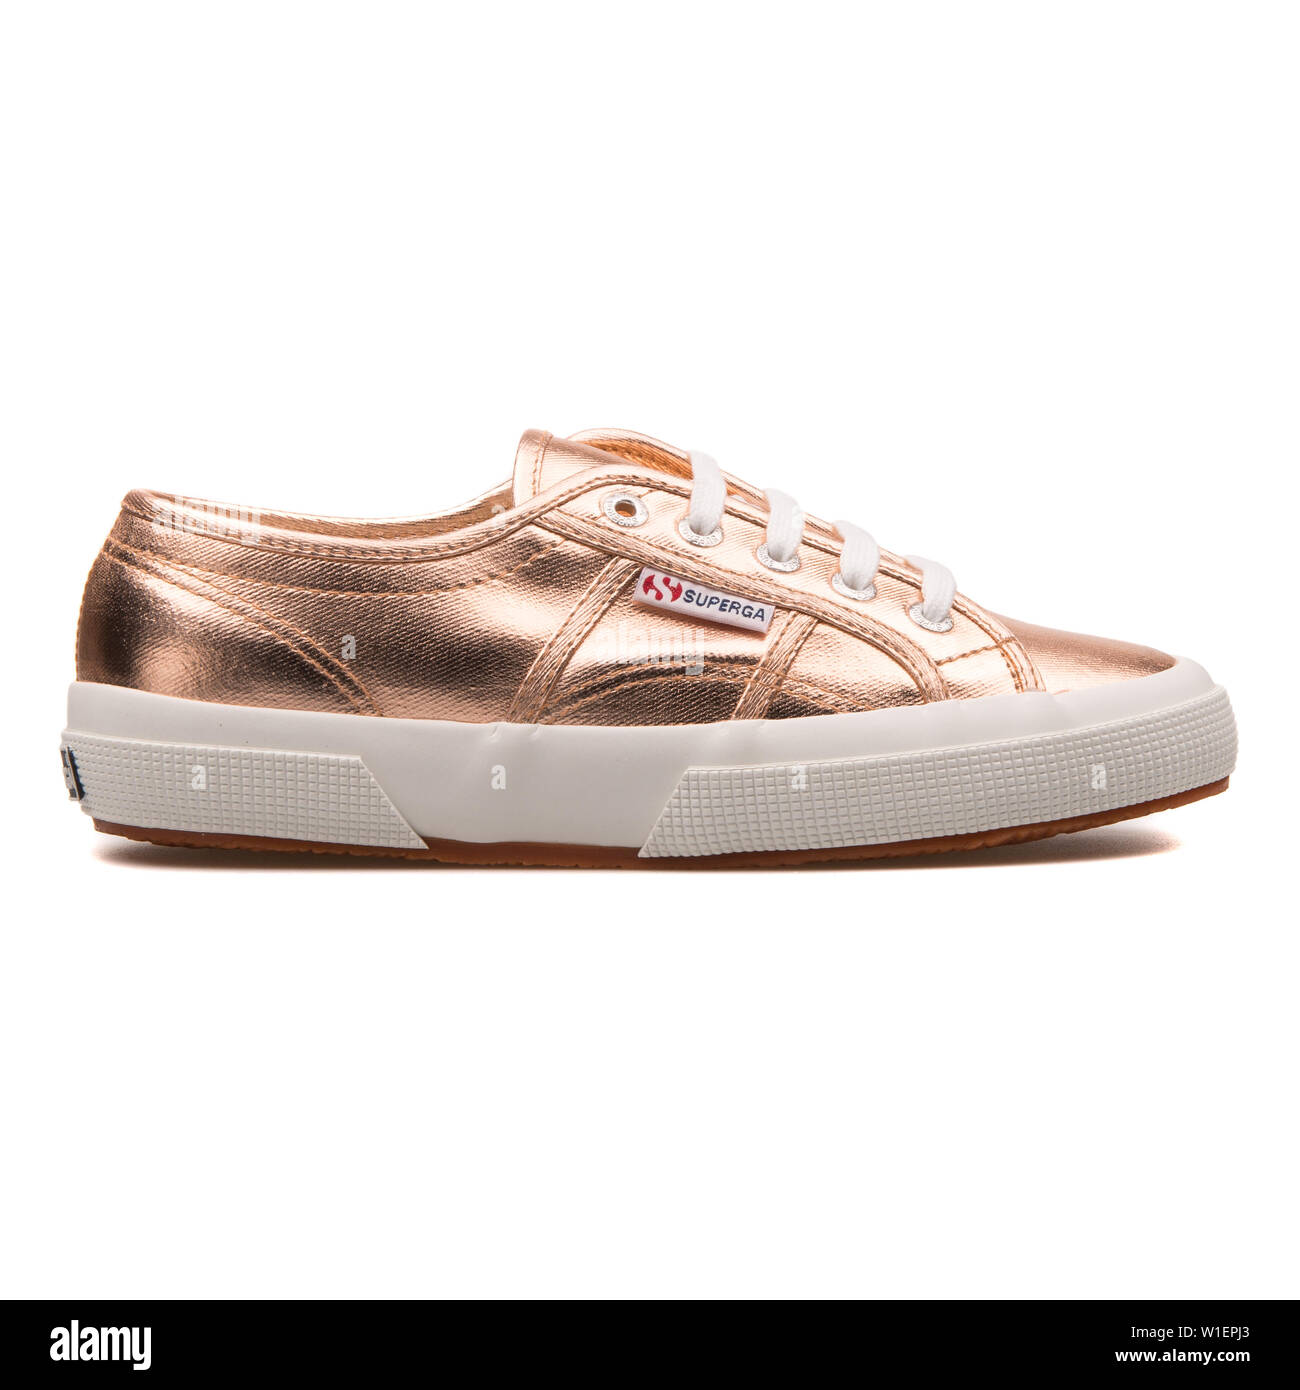 Rose gold, shiny Superga lace up flats/sneakers. A... - Depop